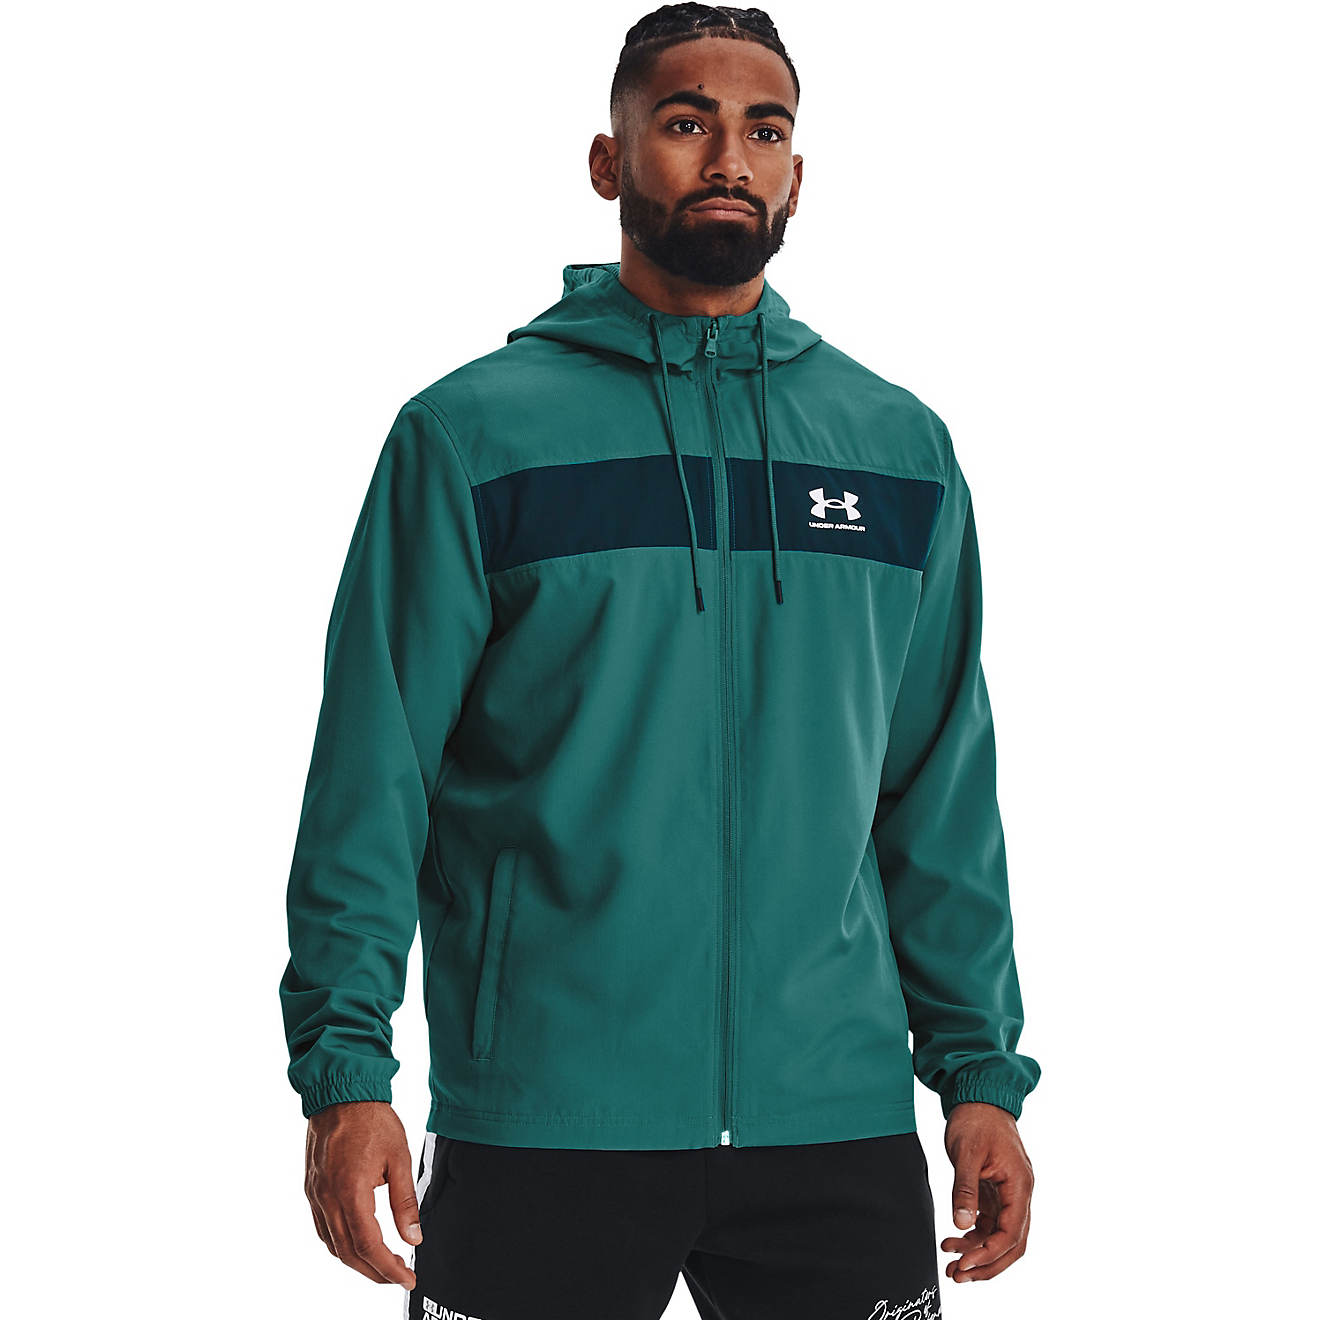 UNDER ARMOUR WIND TOP UNDER ARMOUR FULL ZIP JACKET MENS NEW 1361621 SPORTSTYLE 